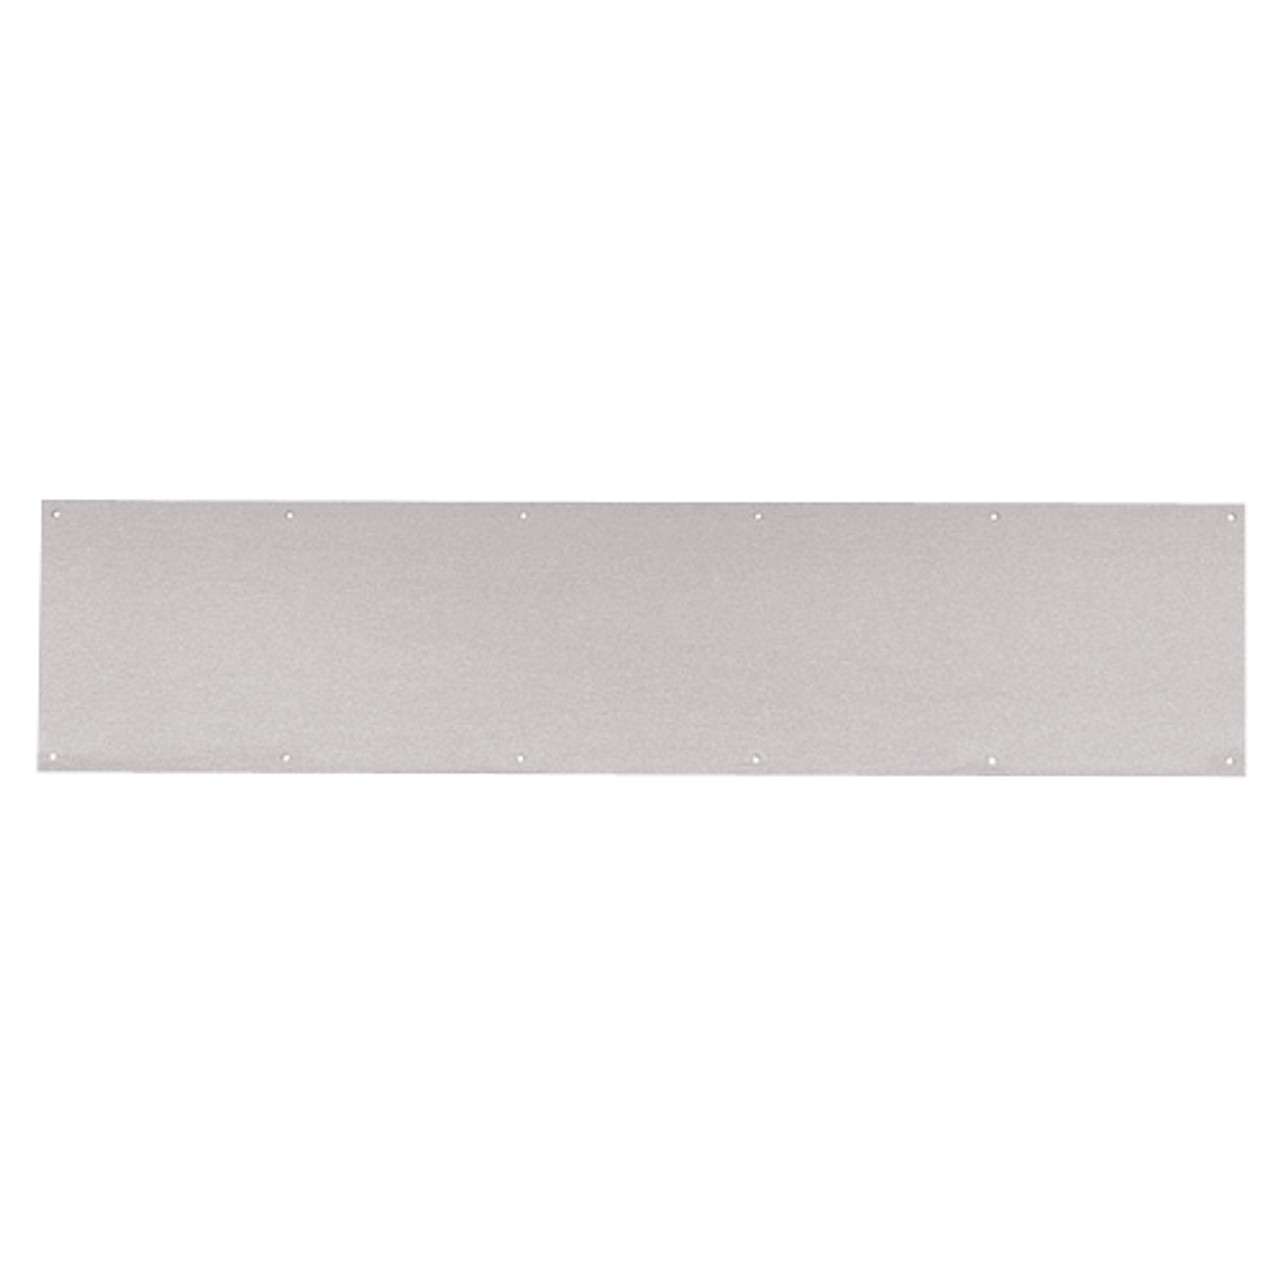 8400-US32D-6x48-B-CS Ives 8400 Series Protection Plate in Satin Stainless Steel